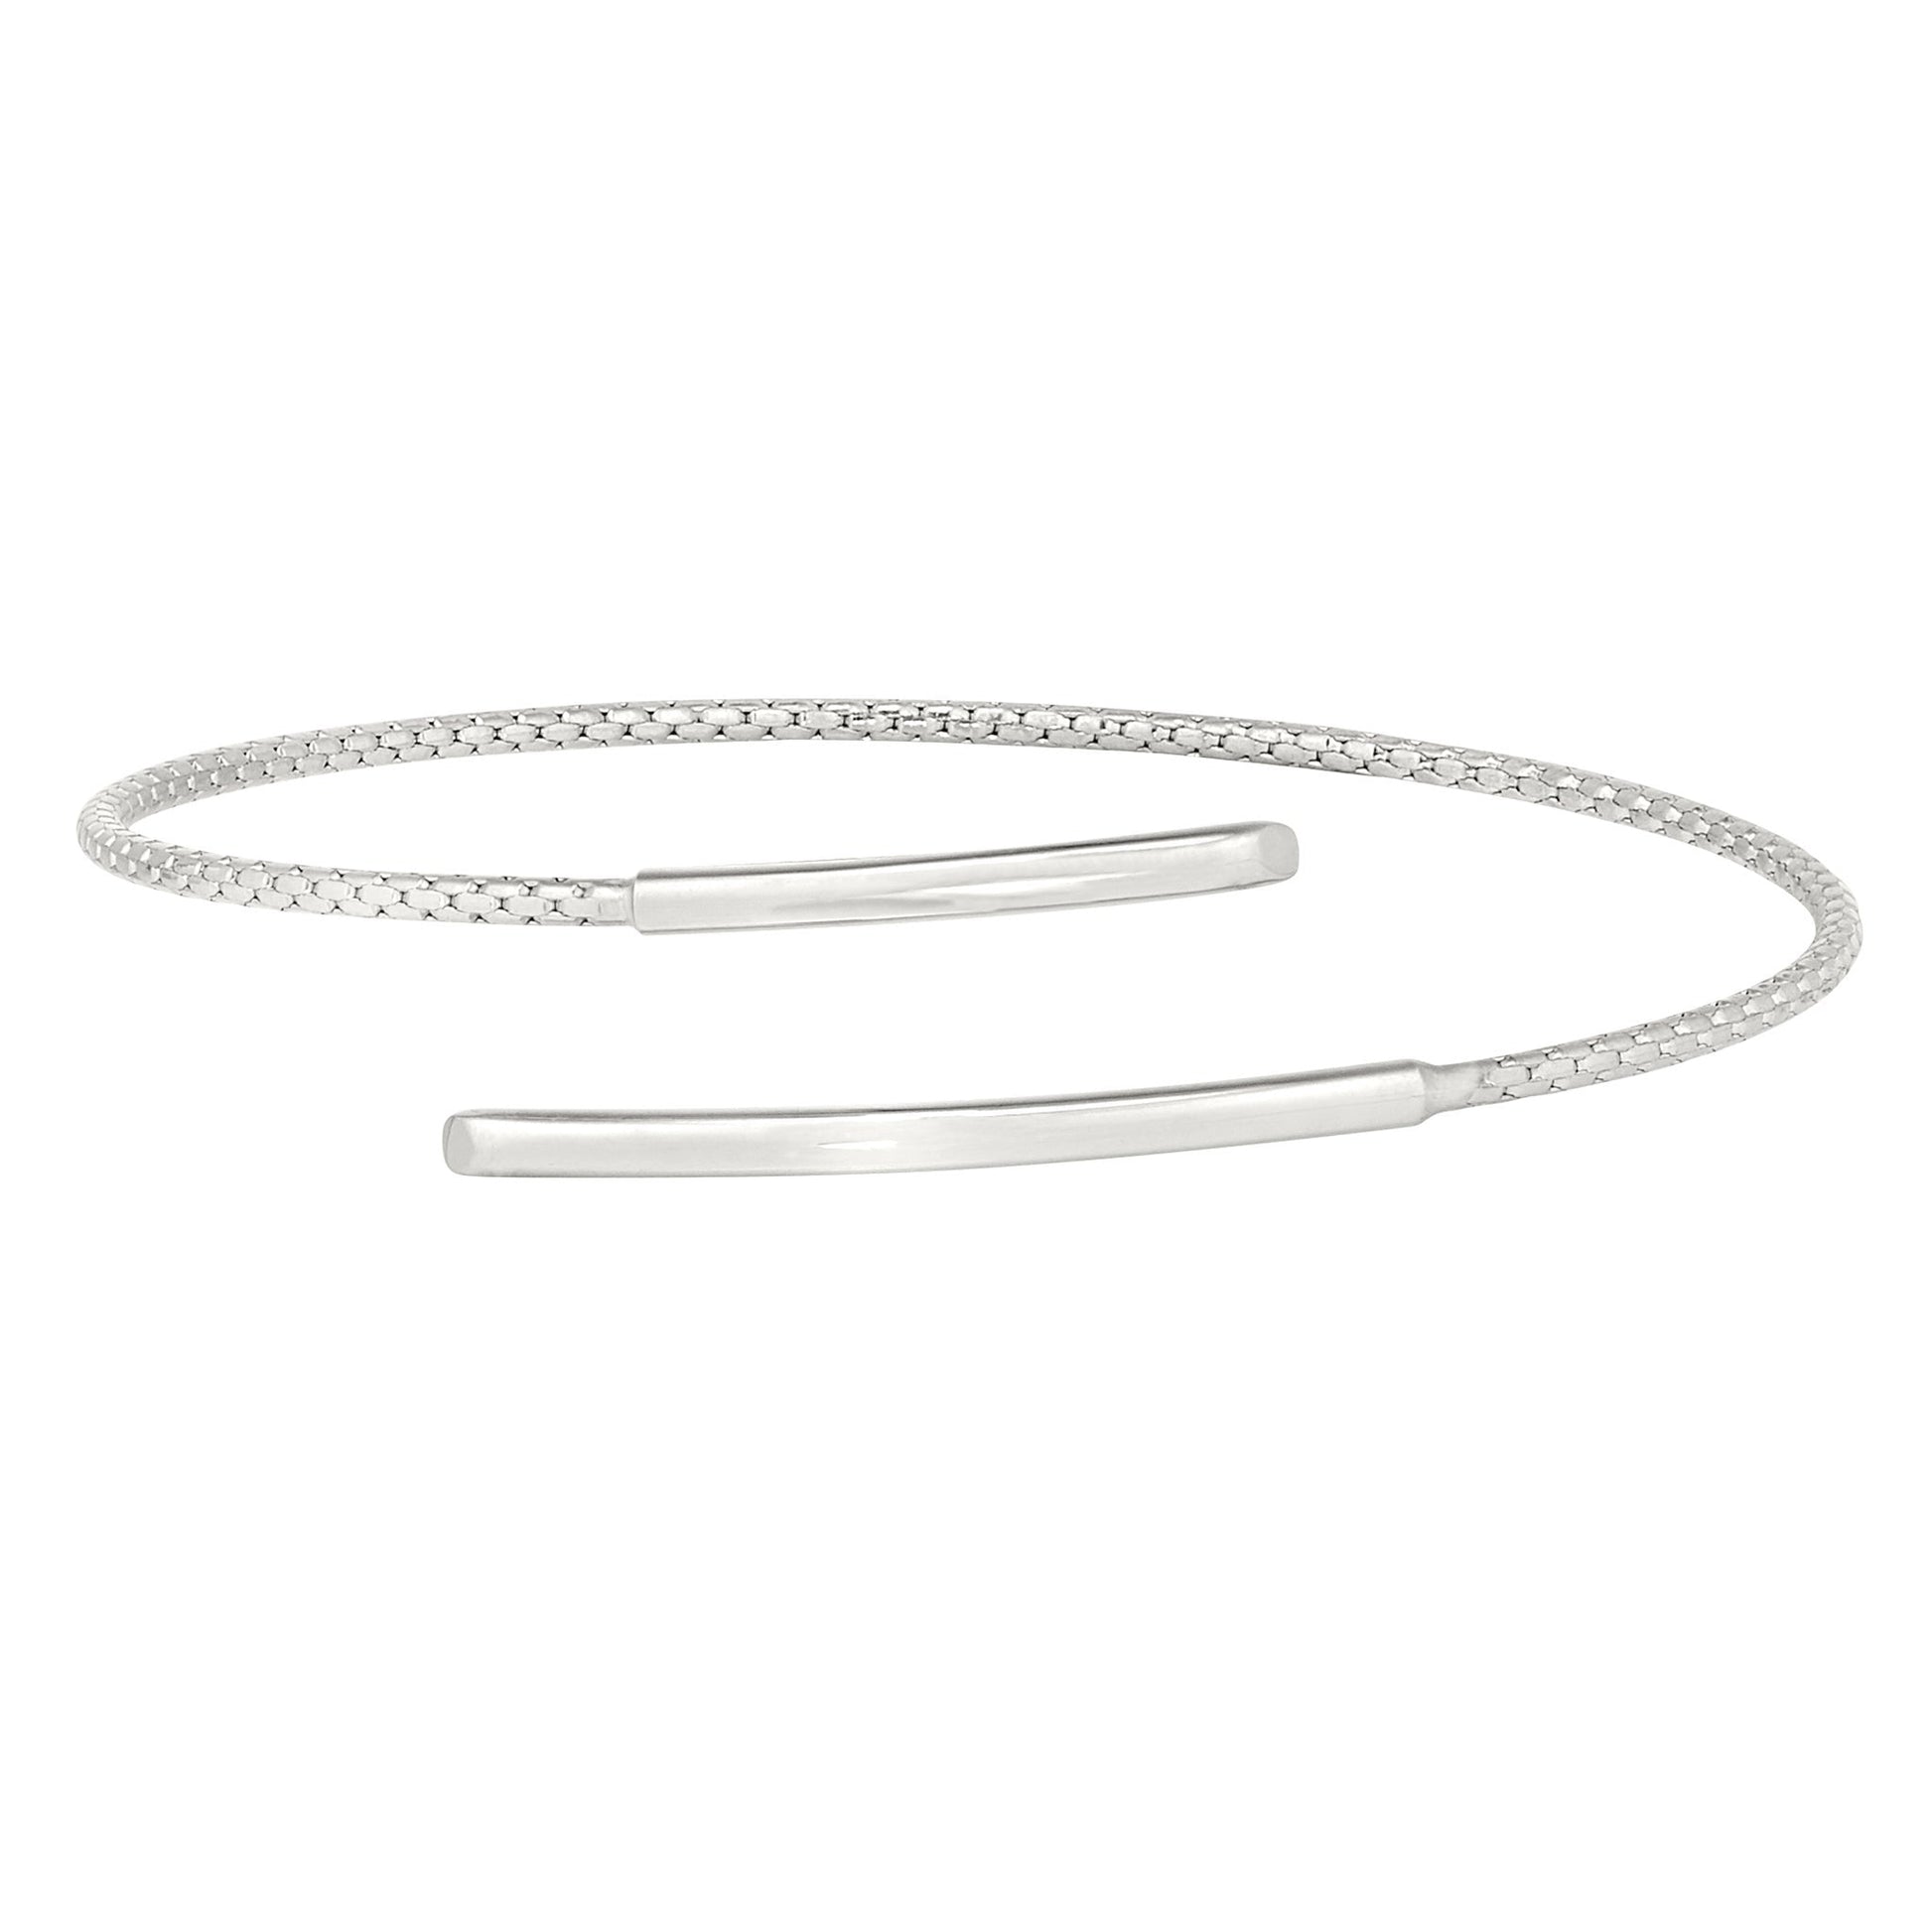 A spiral wrap negative space cable bracelet displayed on a neutral white background.